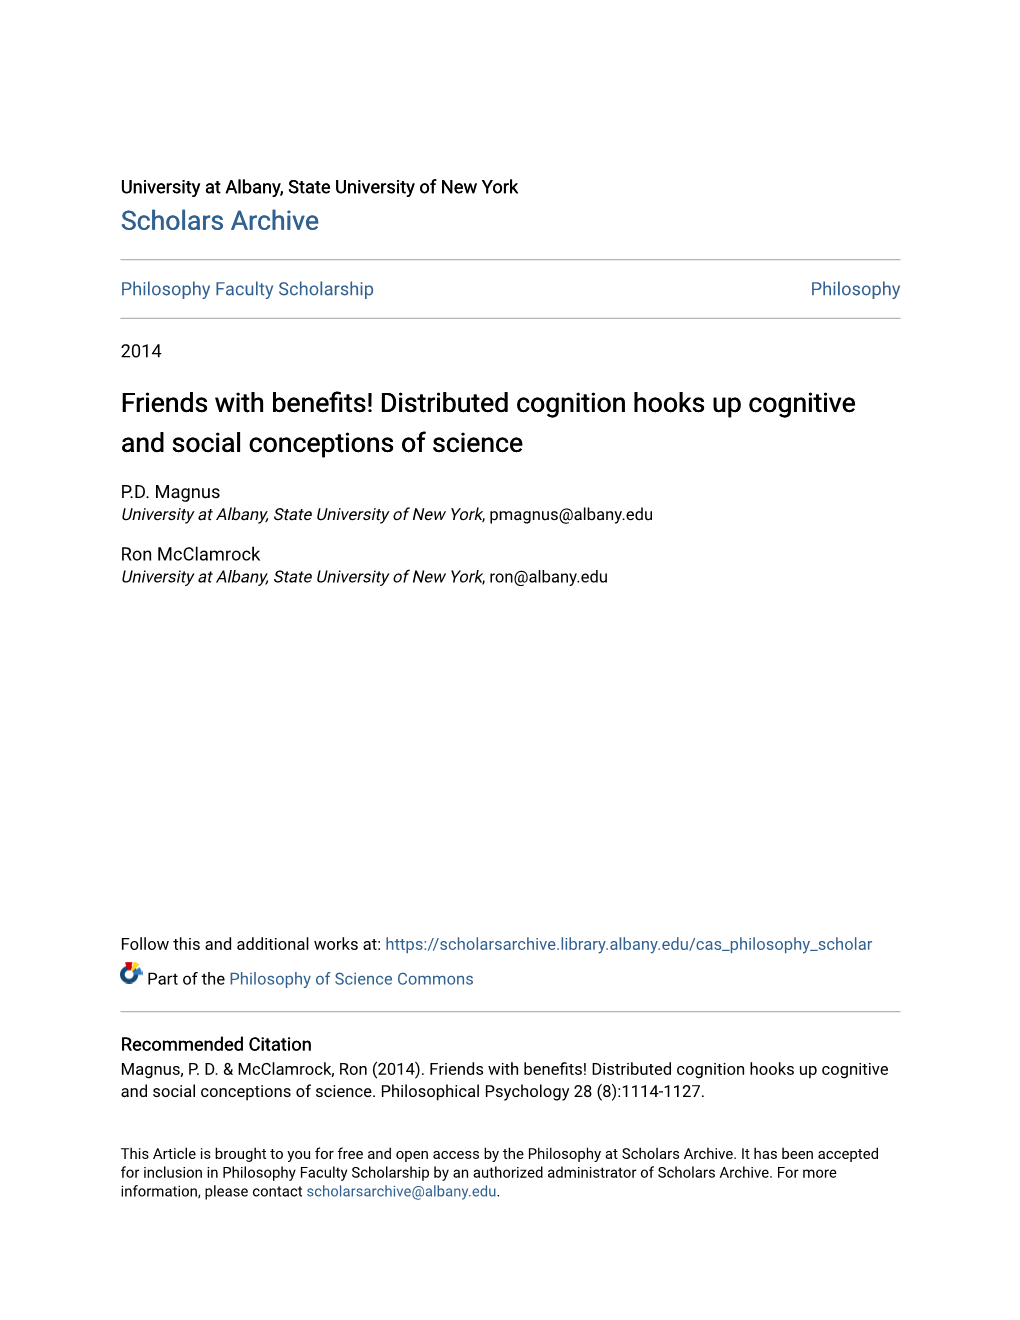 Distributed Cognition Hooks up Cognitive and Social Conceptions of Science